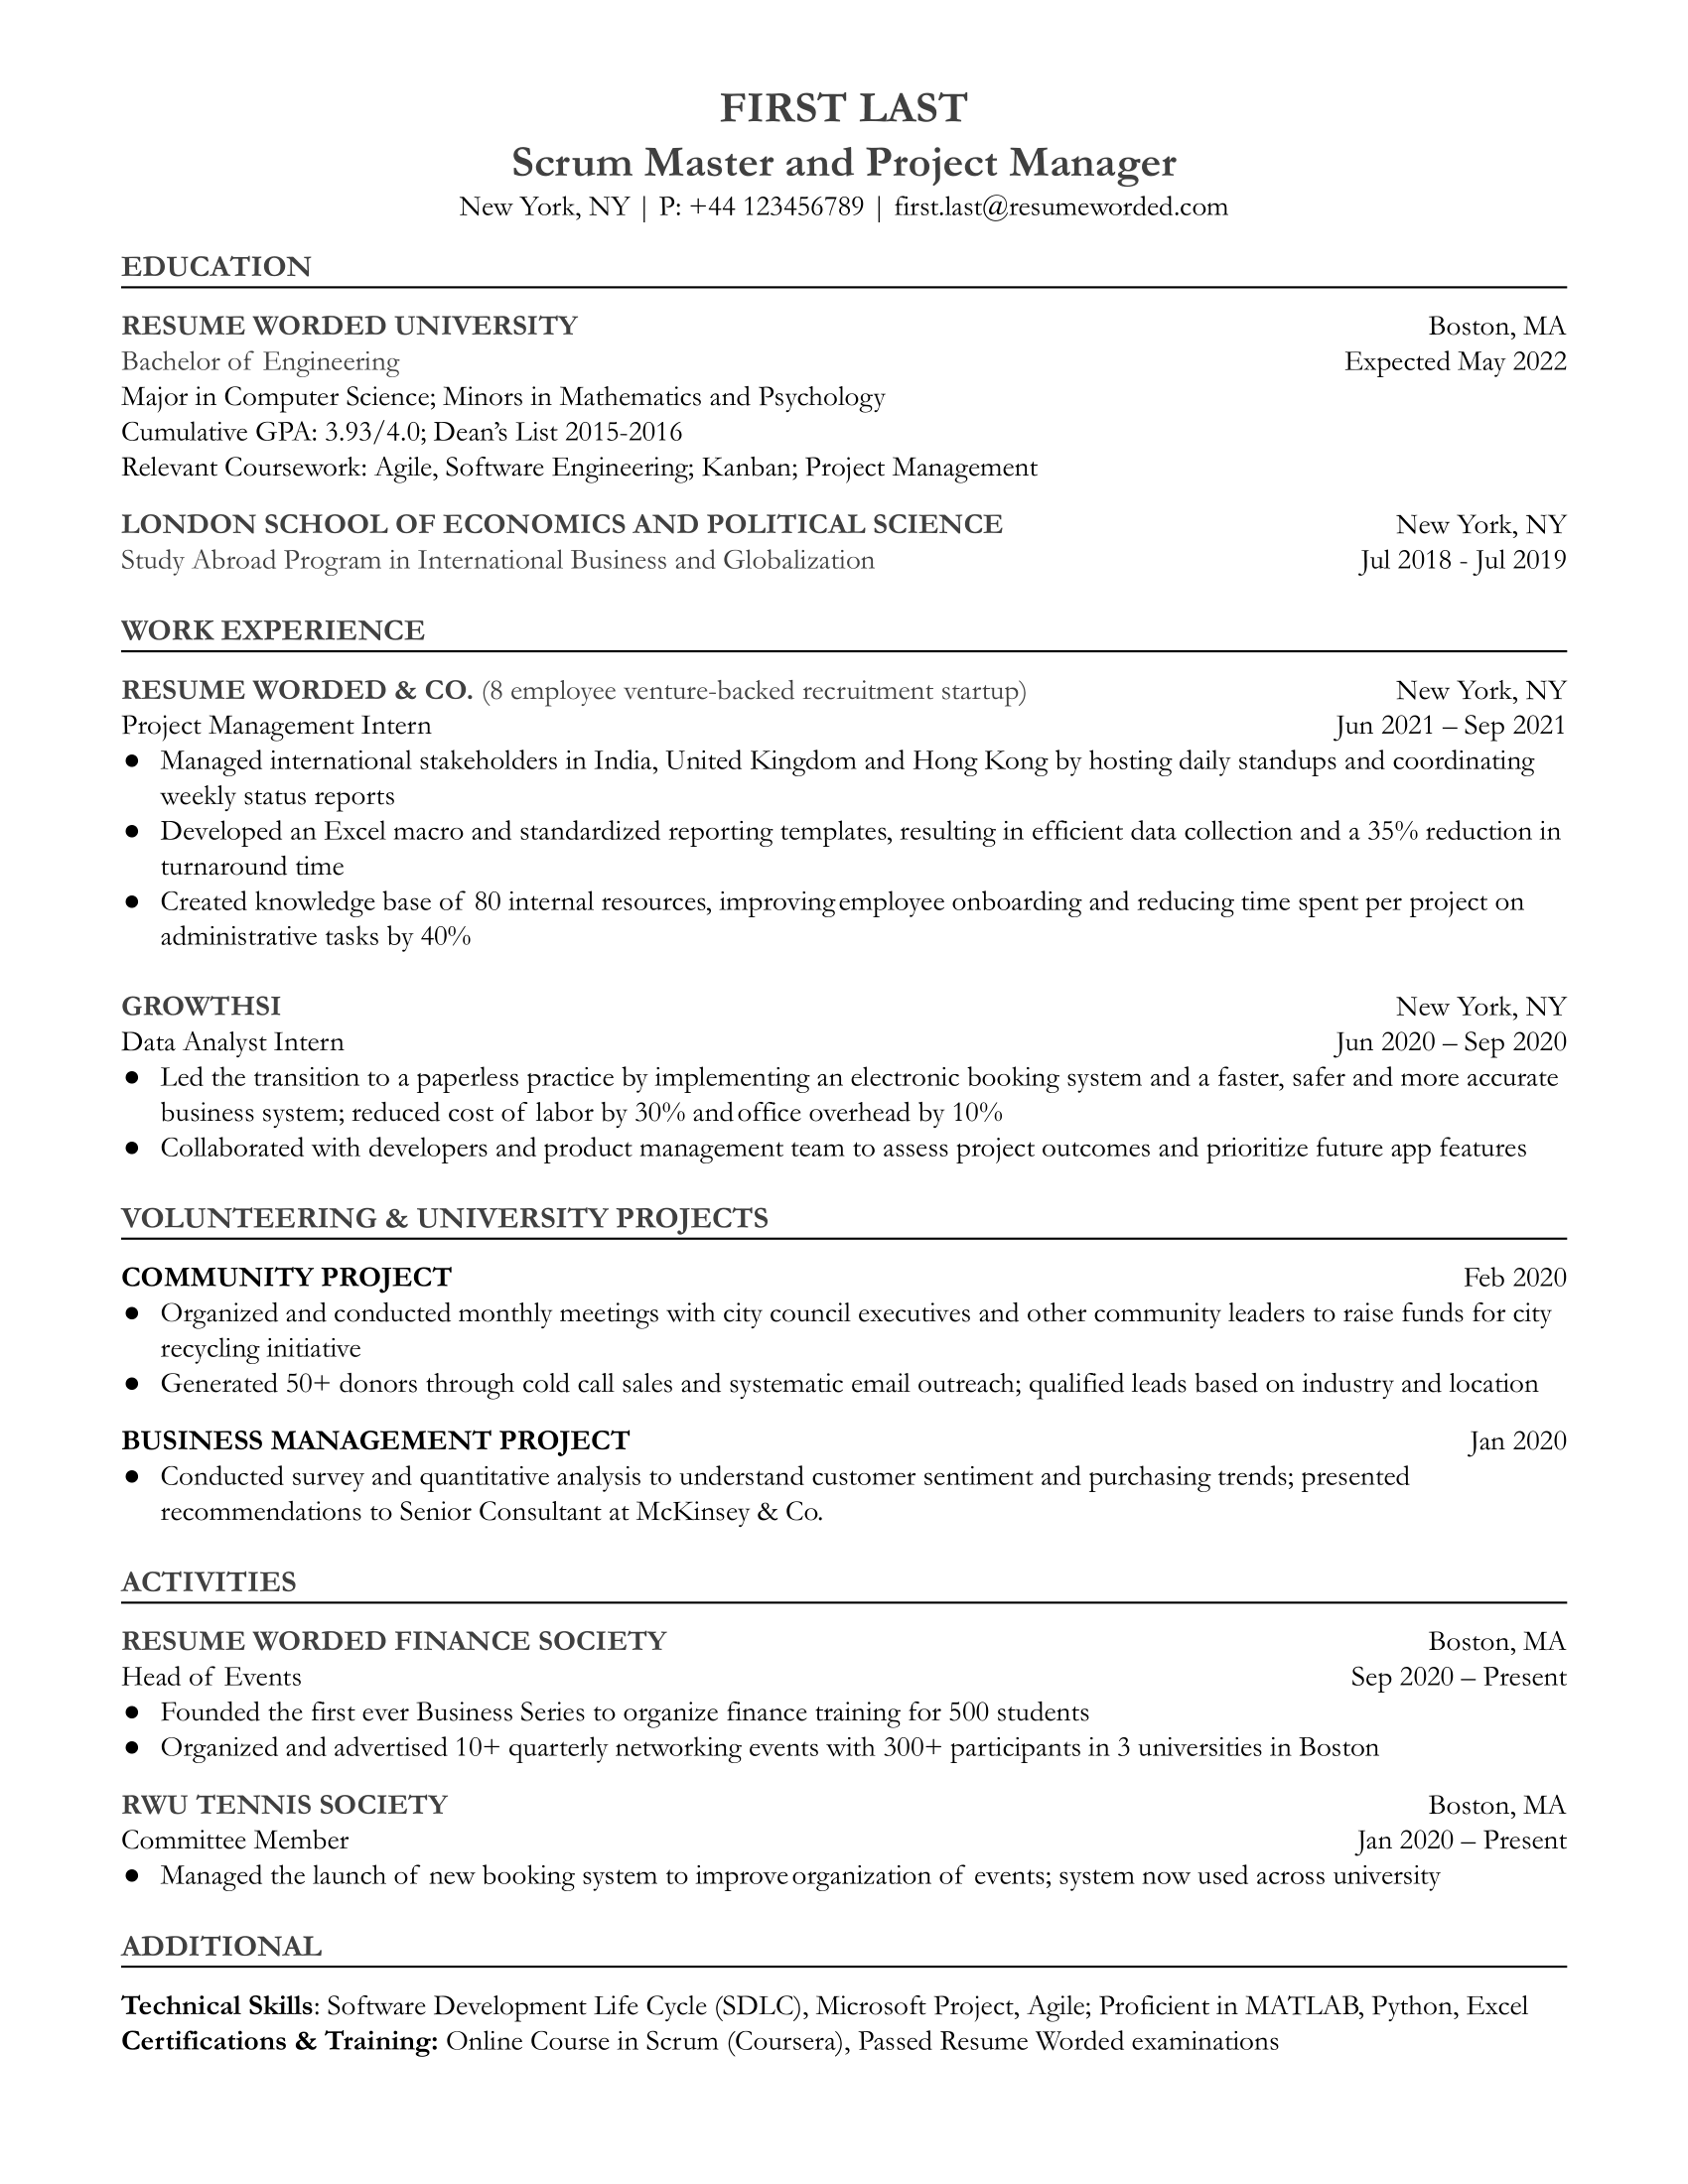 An example of a CV for an entry-level Scrum Master highlighting Agile experience and soft skills.